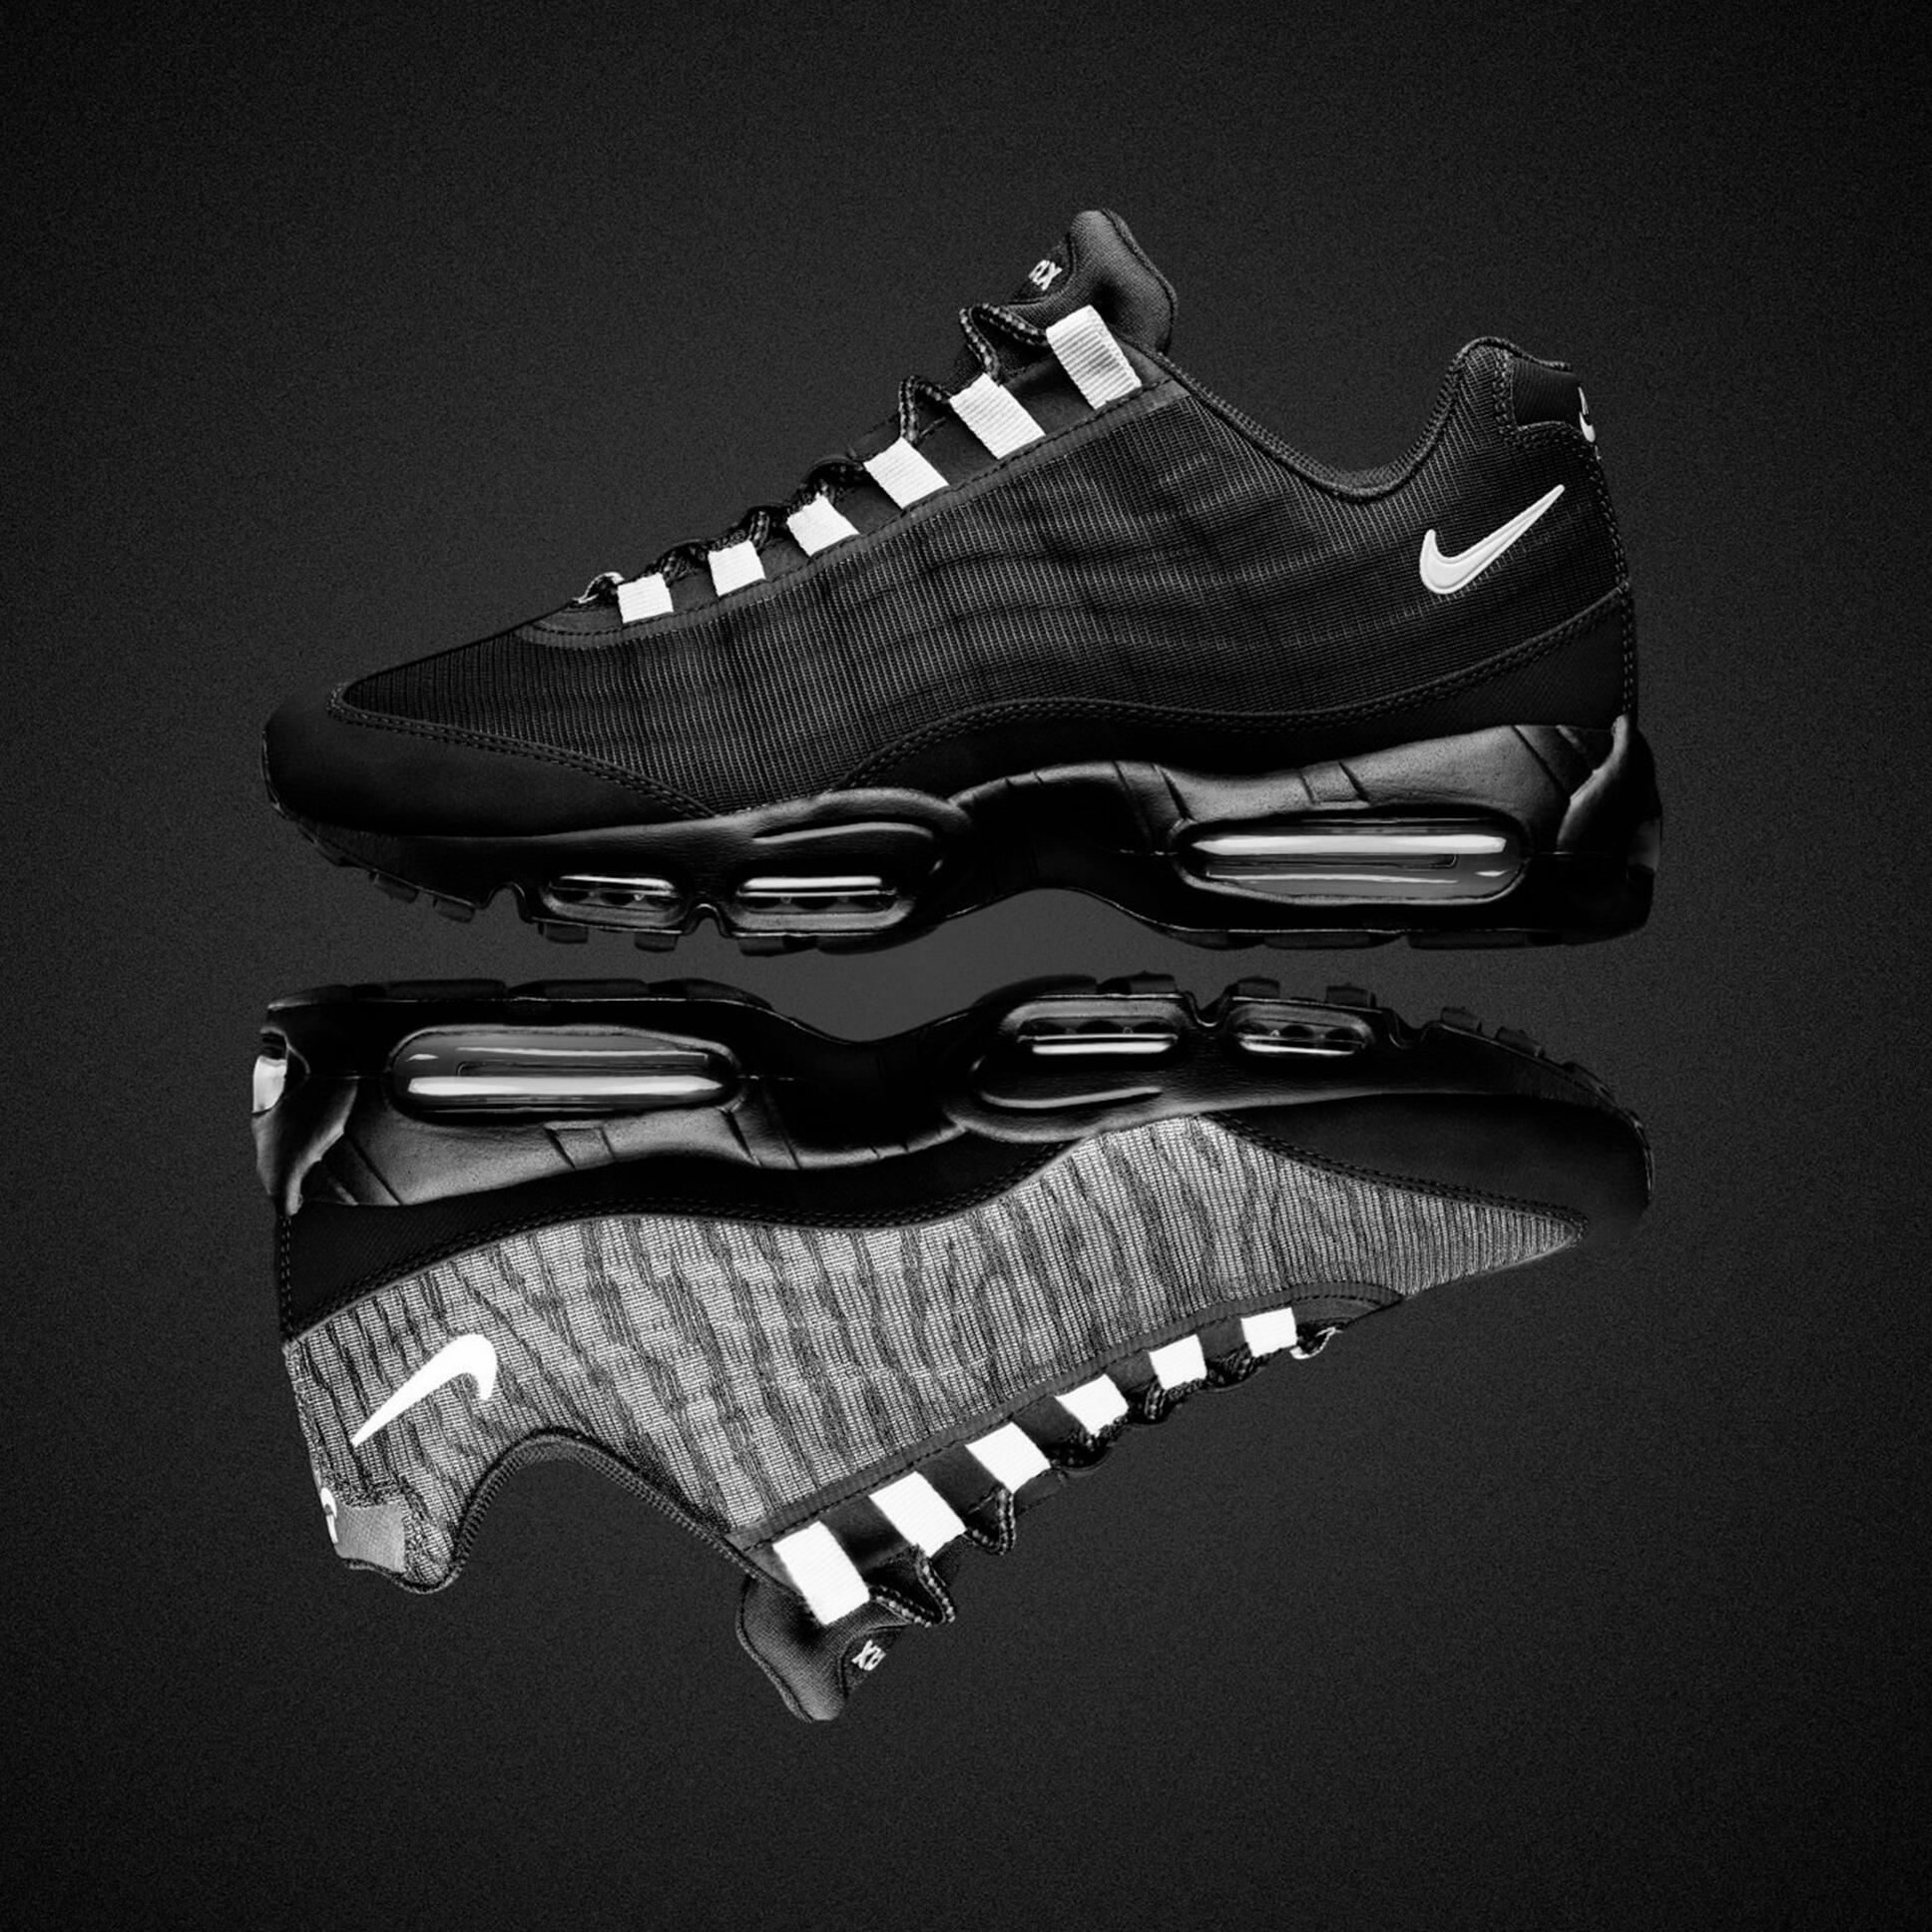 Depression forfriskende Regenerativ Footaction on X: "Here is a look at the new Nike Air Max 95 Premium Tape  Reflective available now. More here. http://t.co/iFickImdB8  http://t.co/NlFWVfYhBH" / X